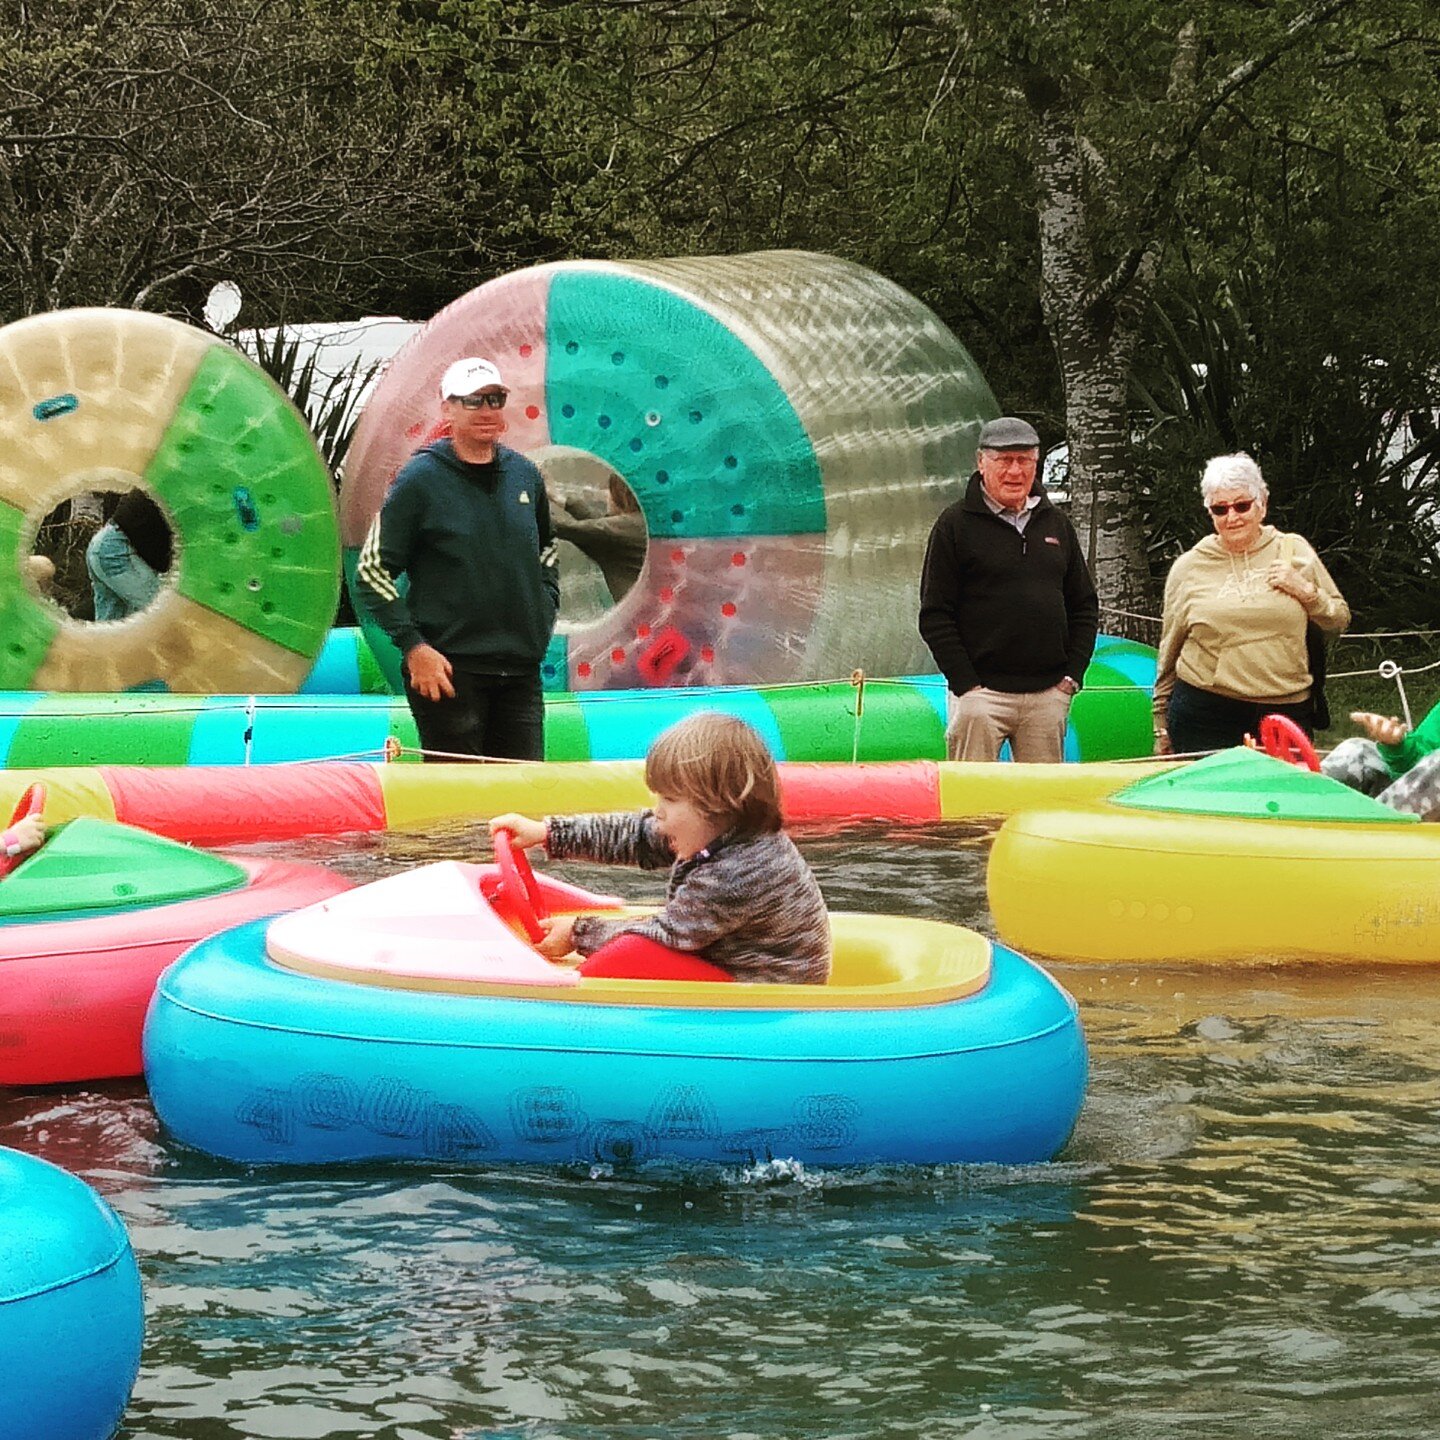 The Bumper boats were one of the attractions at the annual Spring Fair held on Sunday. The food, stalls, music and vintage machinery demonstrations were popular too. Rhododendrons looking fantastic for a few more weeks.